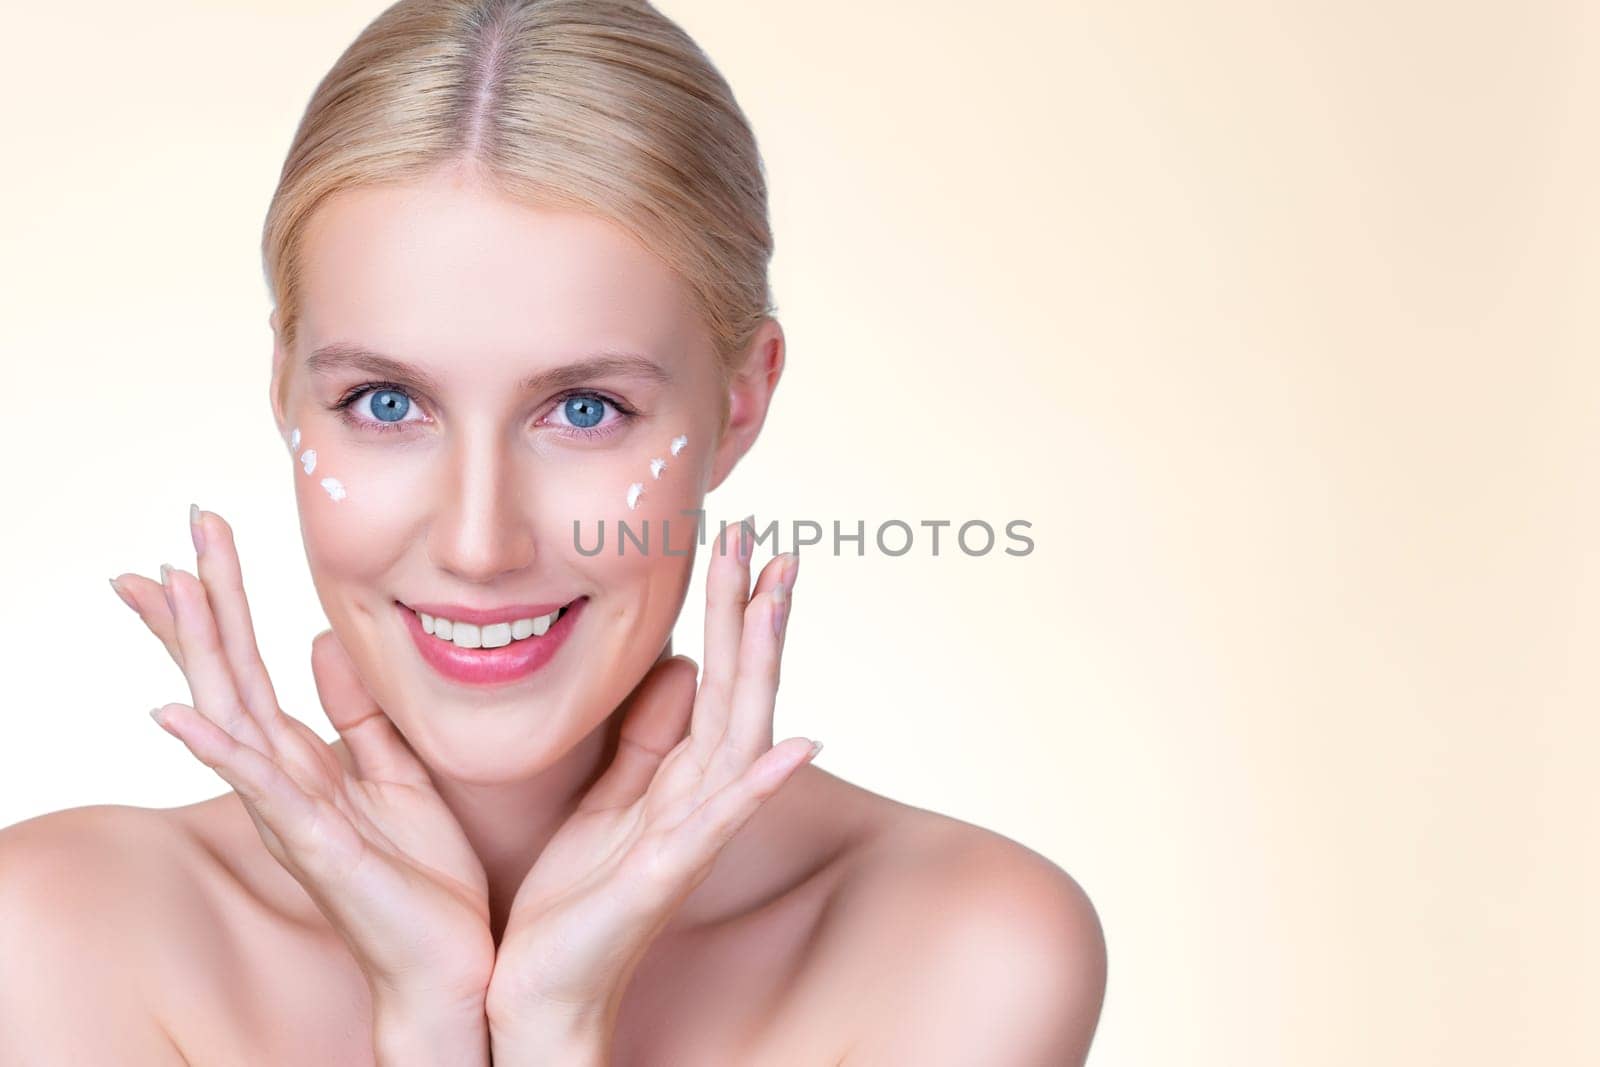 Personable beautiful perfect clean skin soft makeup woman finger applying moisturizer cream on her face under contour eye for anti aging wrinkle. Facial skin rejuvenation in isolated background.